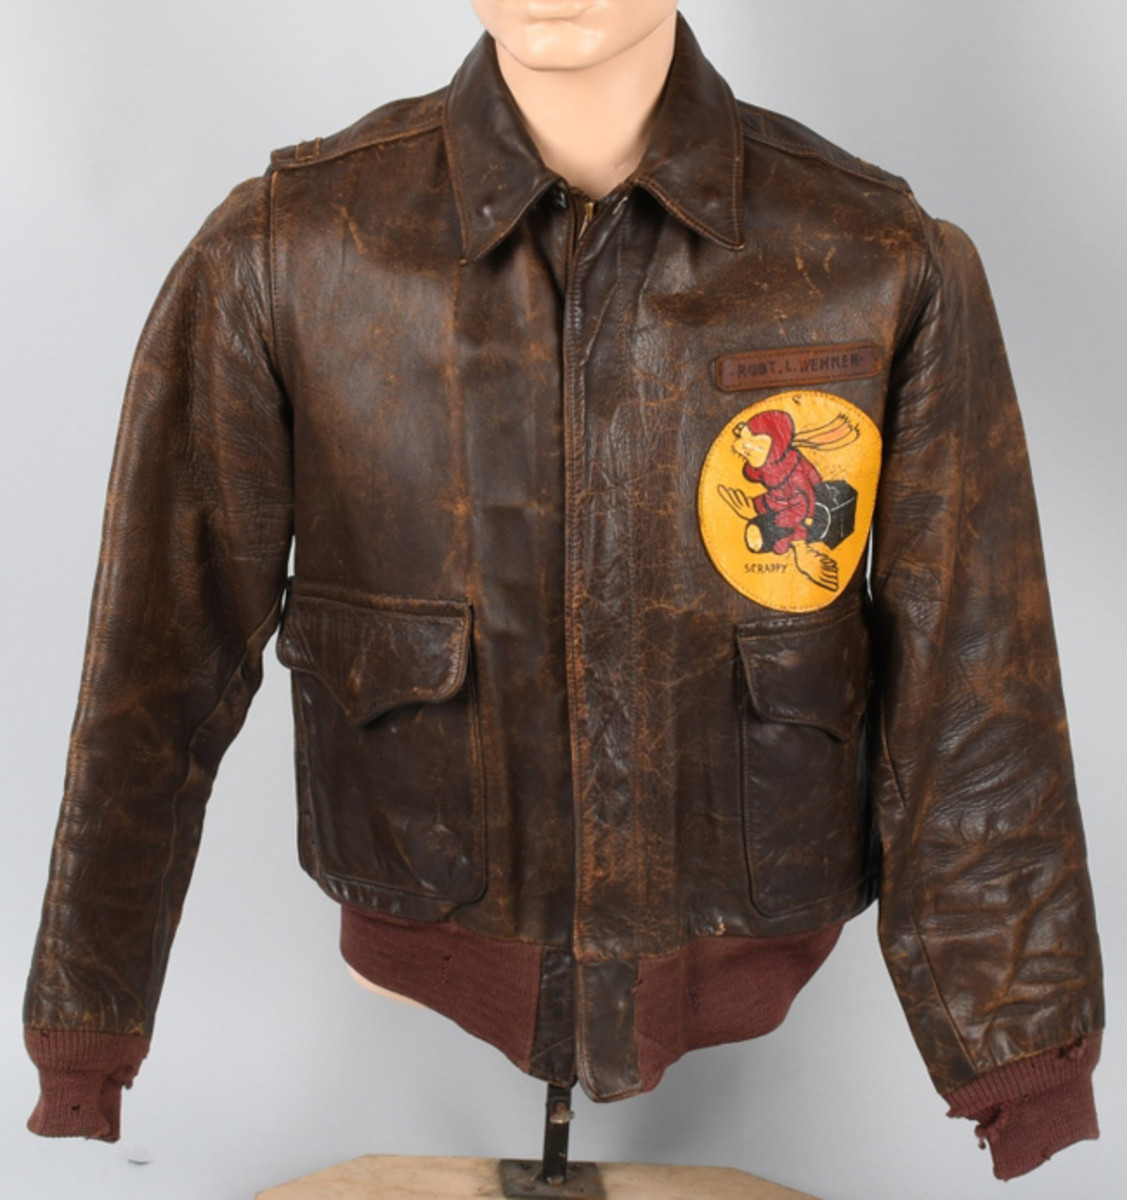  https://www.liveauctioneers.com/item/61938460_wwii-us-army-air-force-a-2-jacket-4th-recon-squadWorld War II U.S. 13th Army Air Force A-2 jacket, 4th Recon Squadron, $1,680